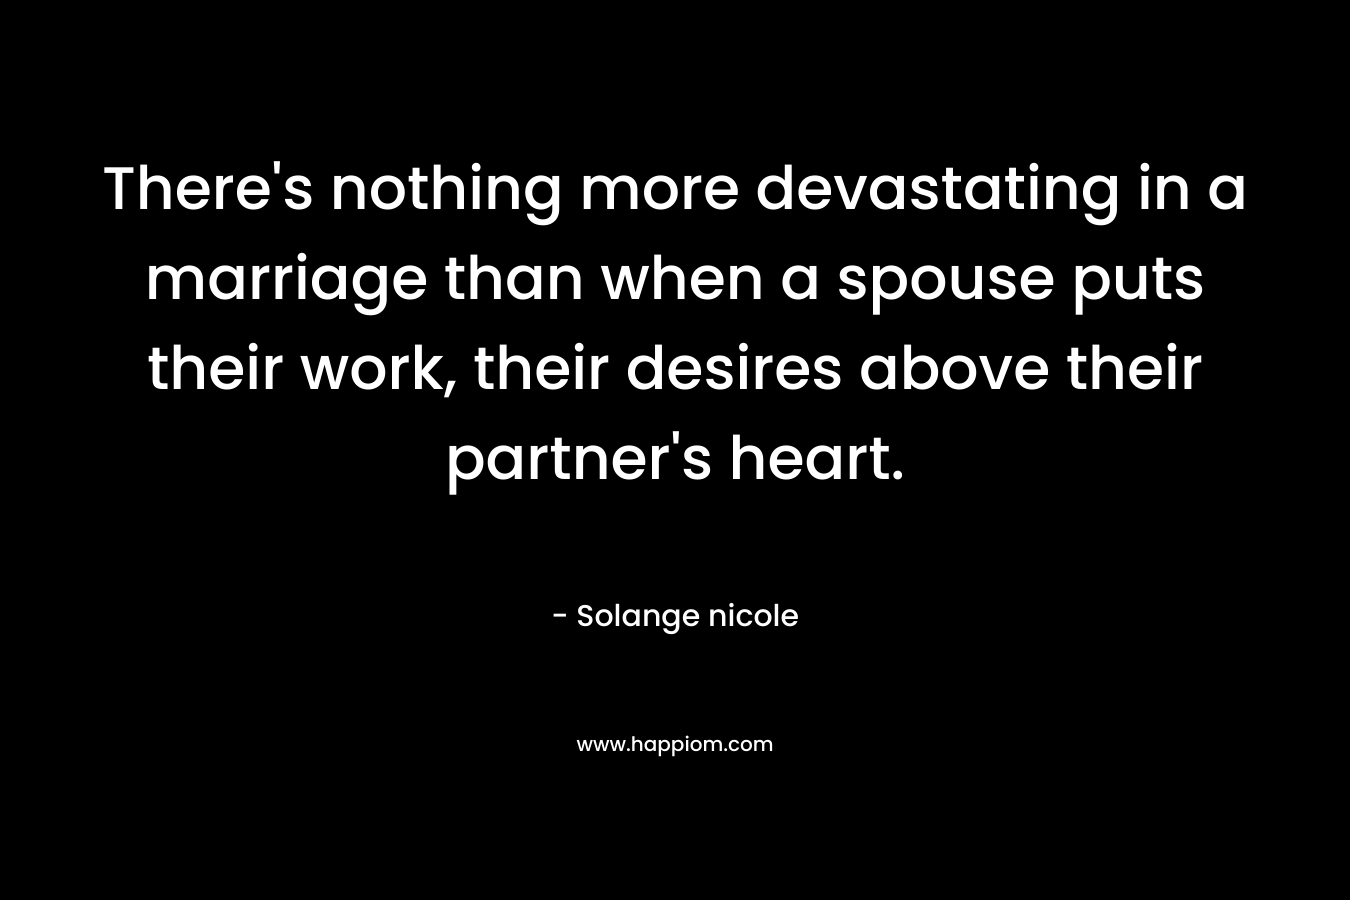 There’s nothing more devastating in a marriage than when a spouse puts their work, their desires above their partner’s heart. – Solange nicole